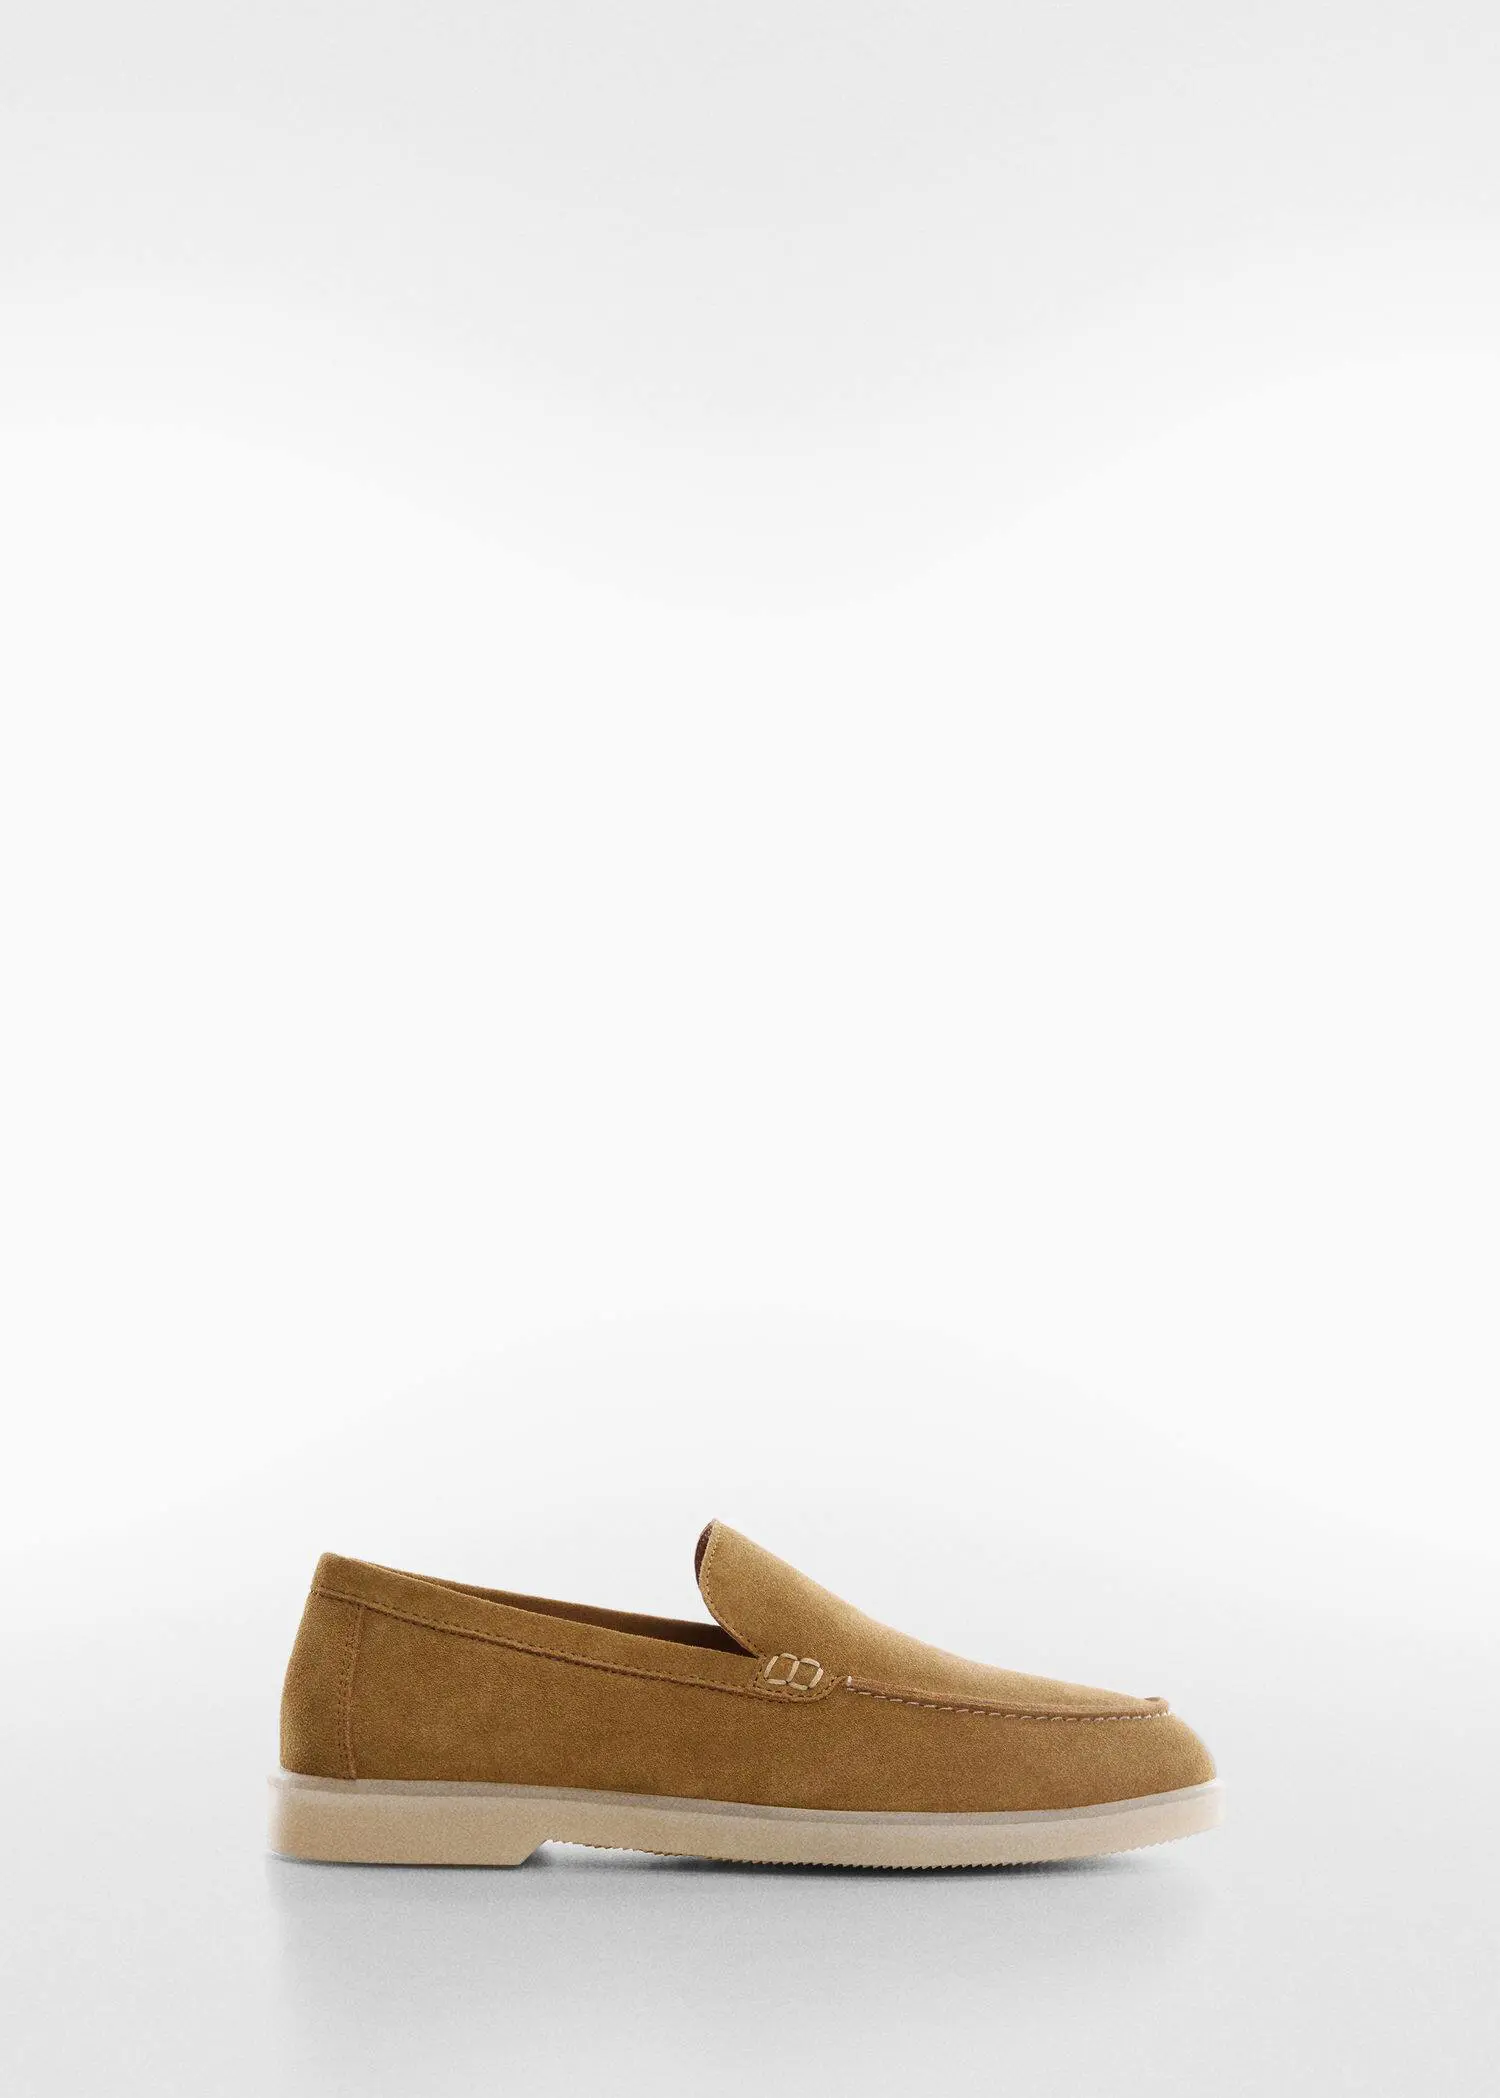 Mango Split leather shoes. a tan loafer shoe on top of a white surface. 